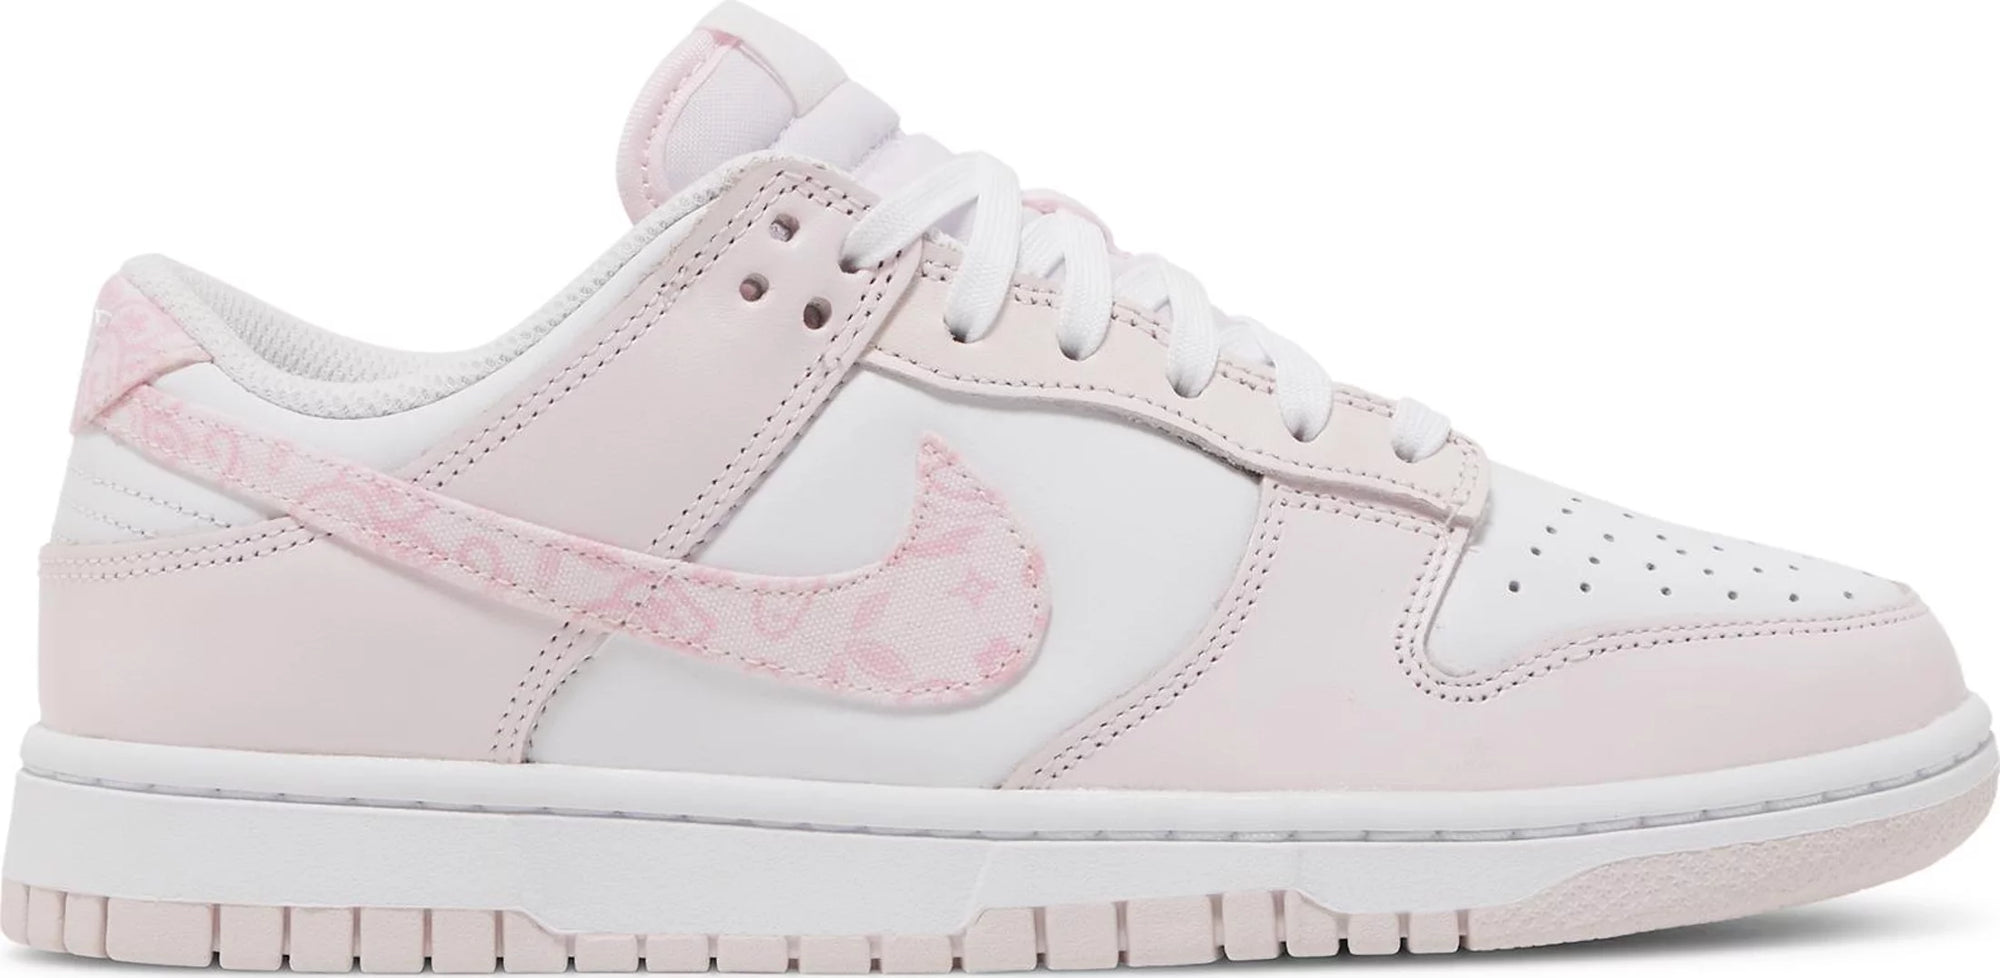 Nike Dunk Low- Paisley Pack Pink